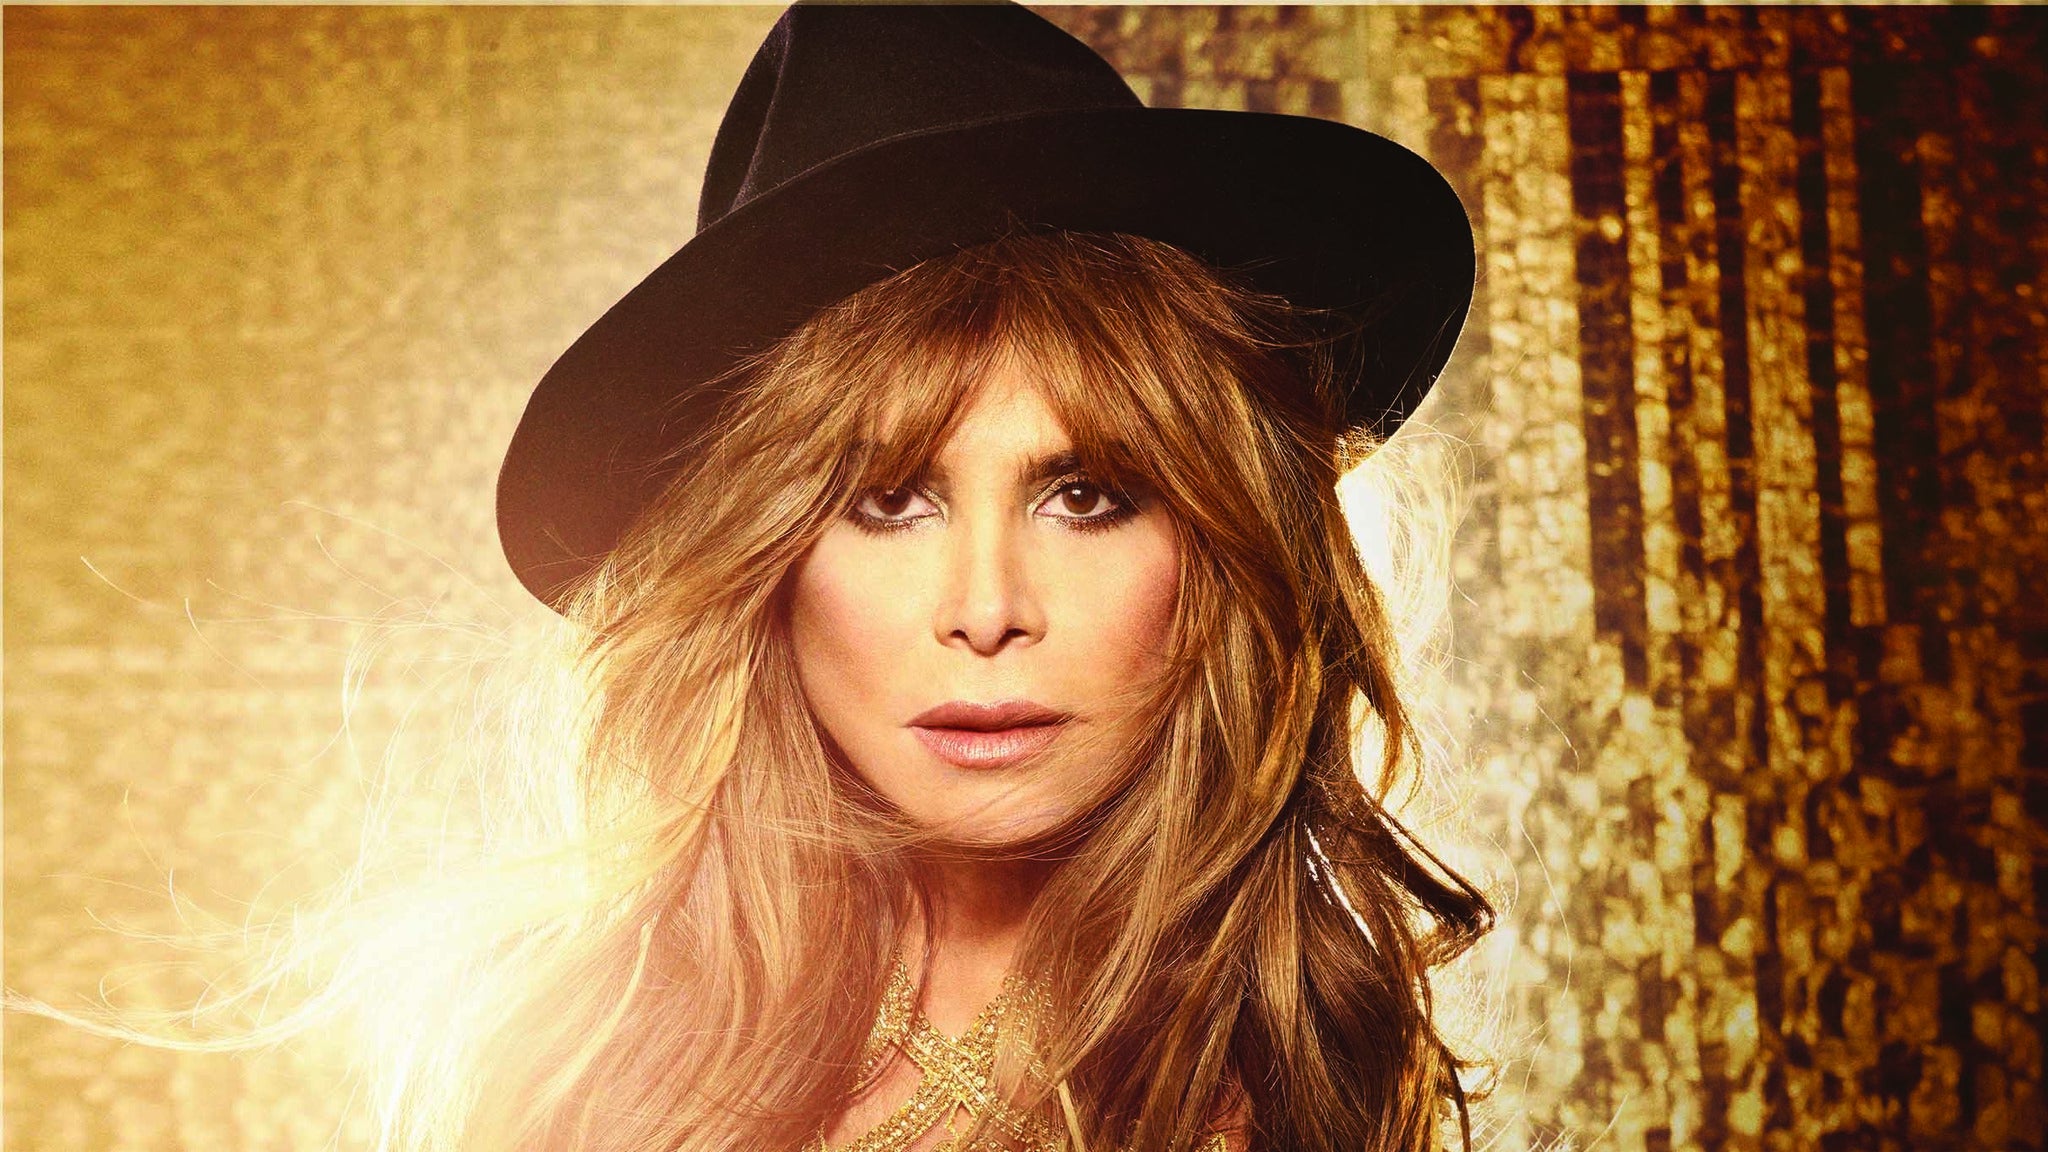 Paula Abdul: STRAIGHT UP PAULA! in Windsor promo photo for Official Platinum presale offer code